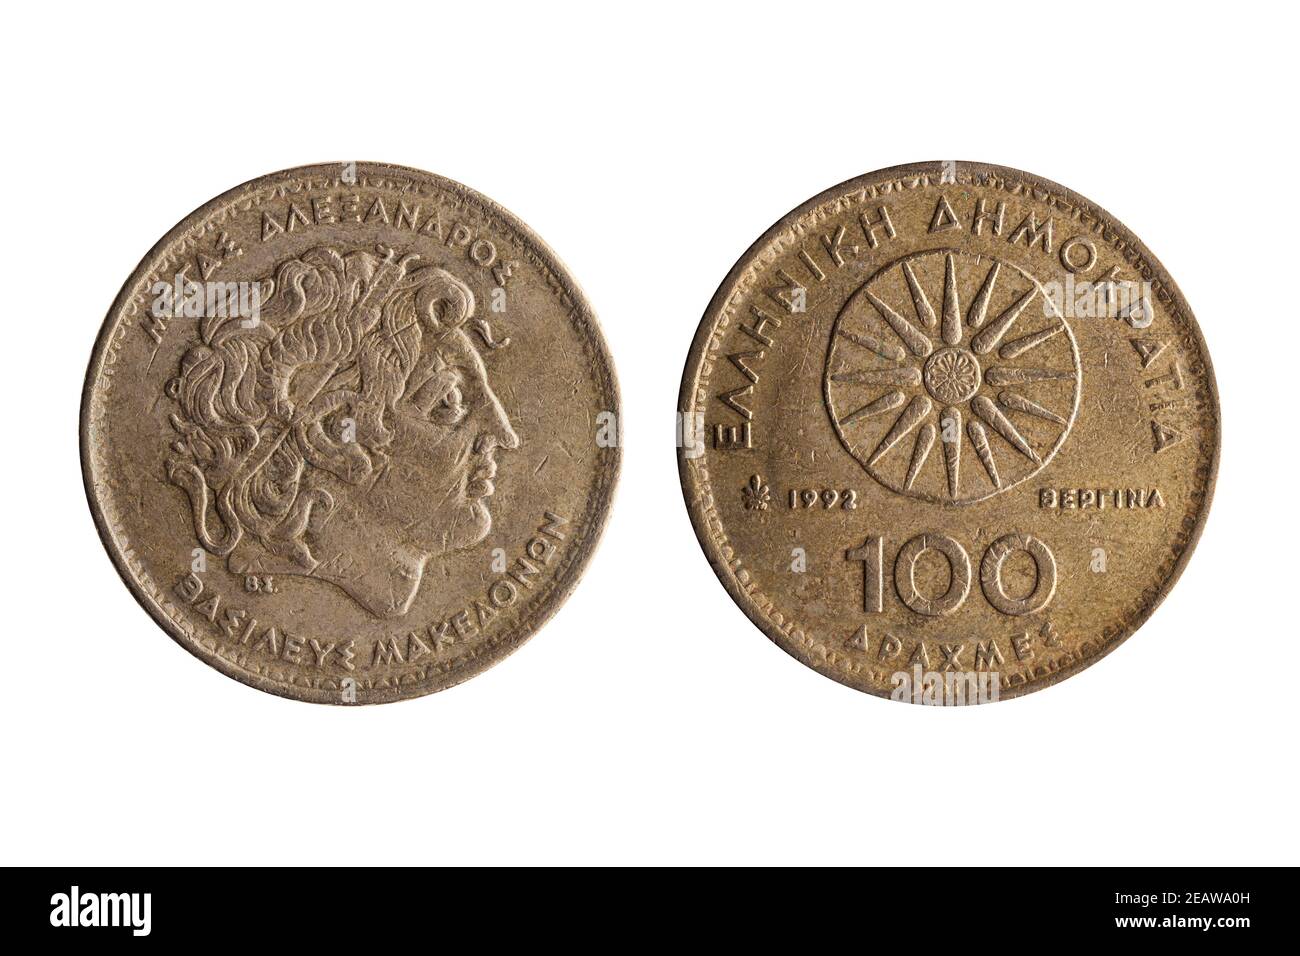 Greek 100 drachmas coin dated 1992 with a portrait image of Alexander the Great obverse and Star of Vergina reverse cut out and isolated Stock Photo